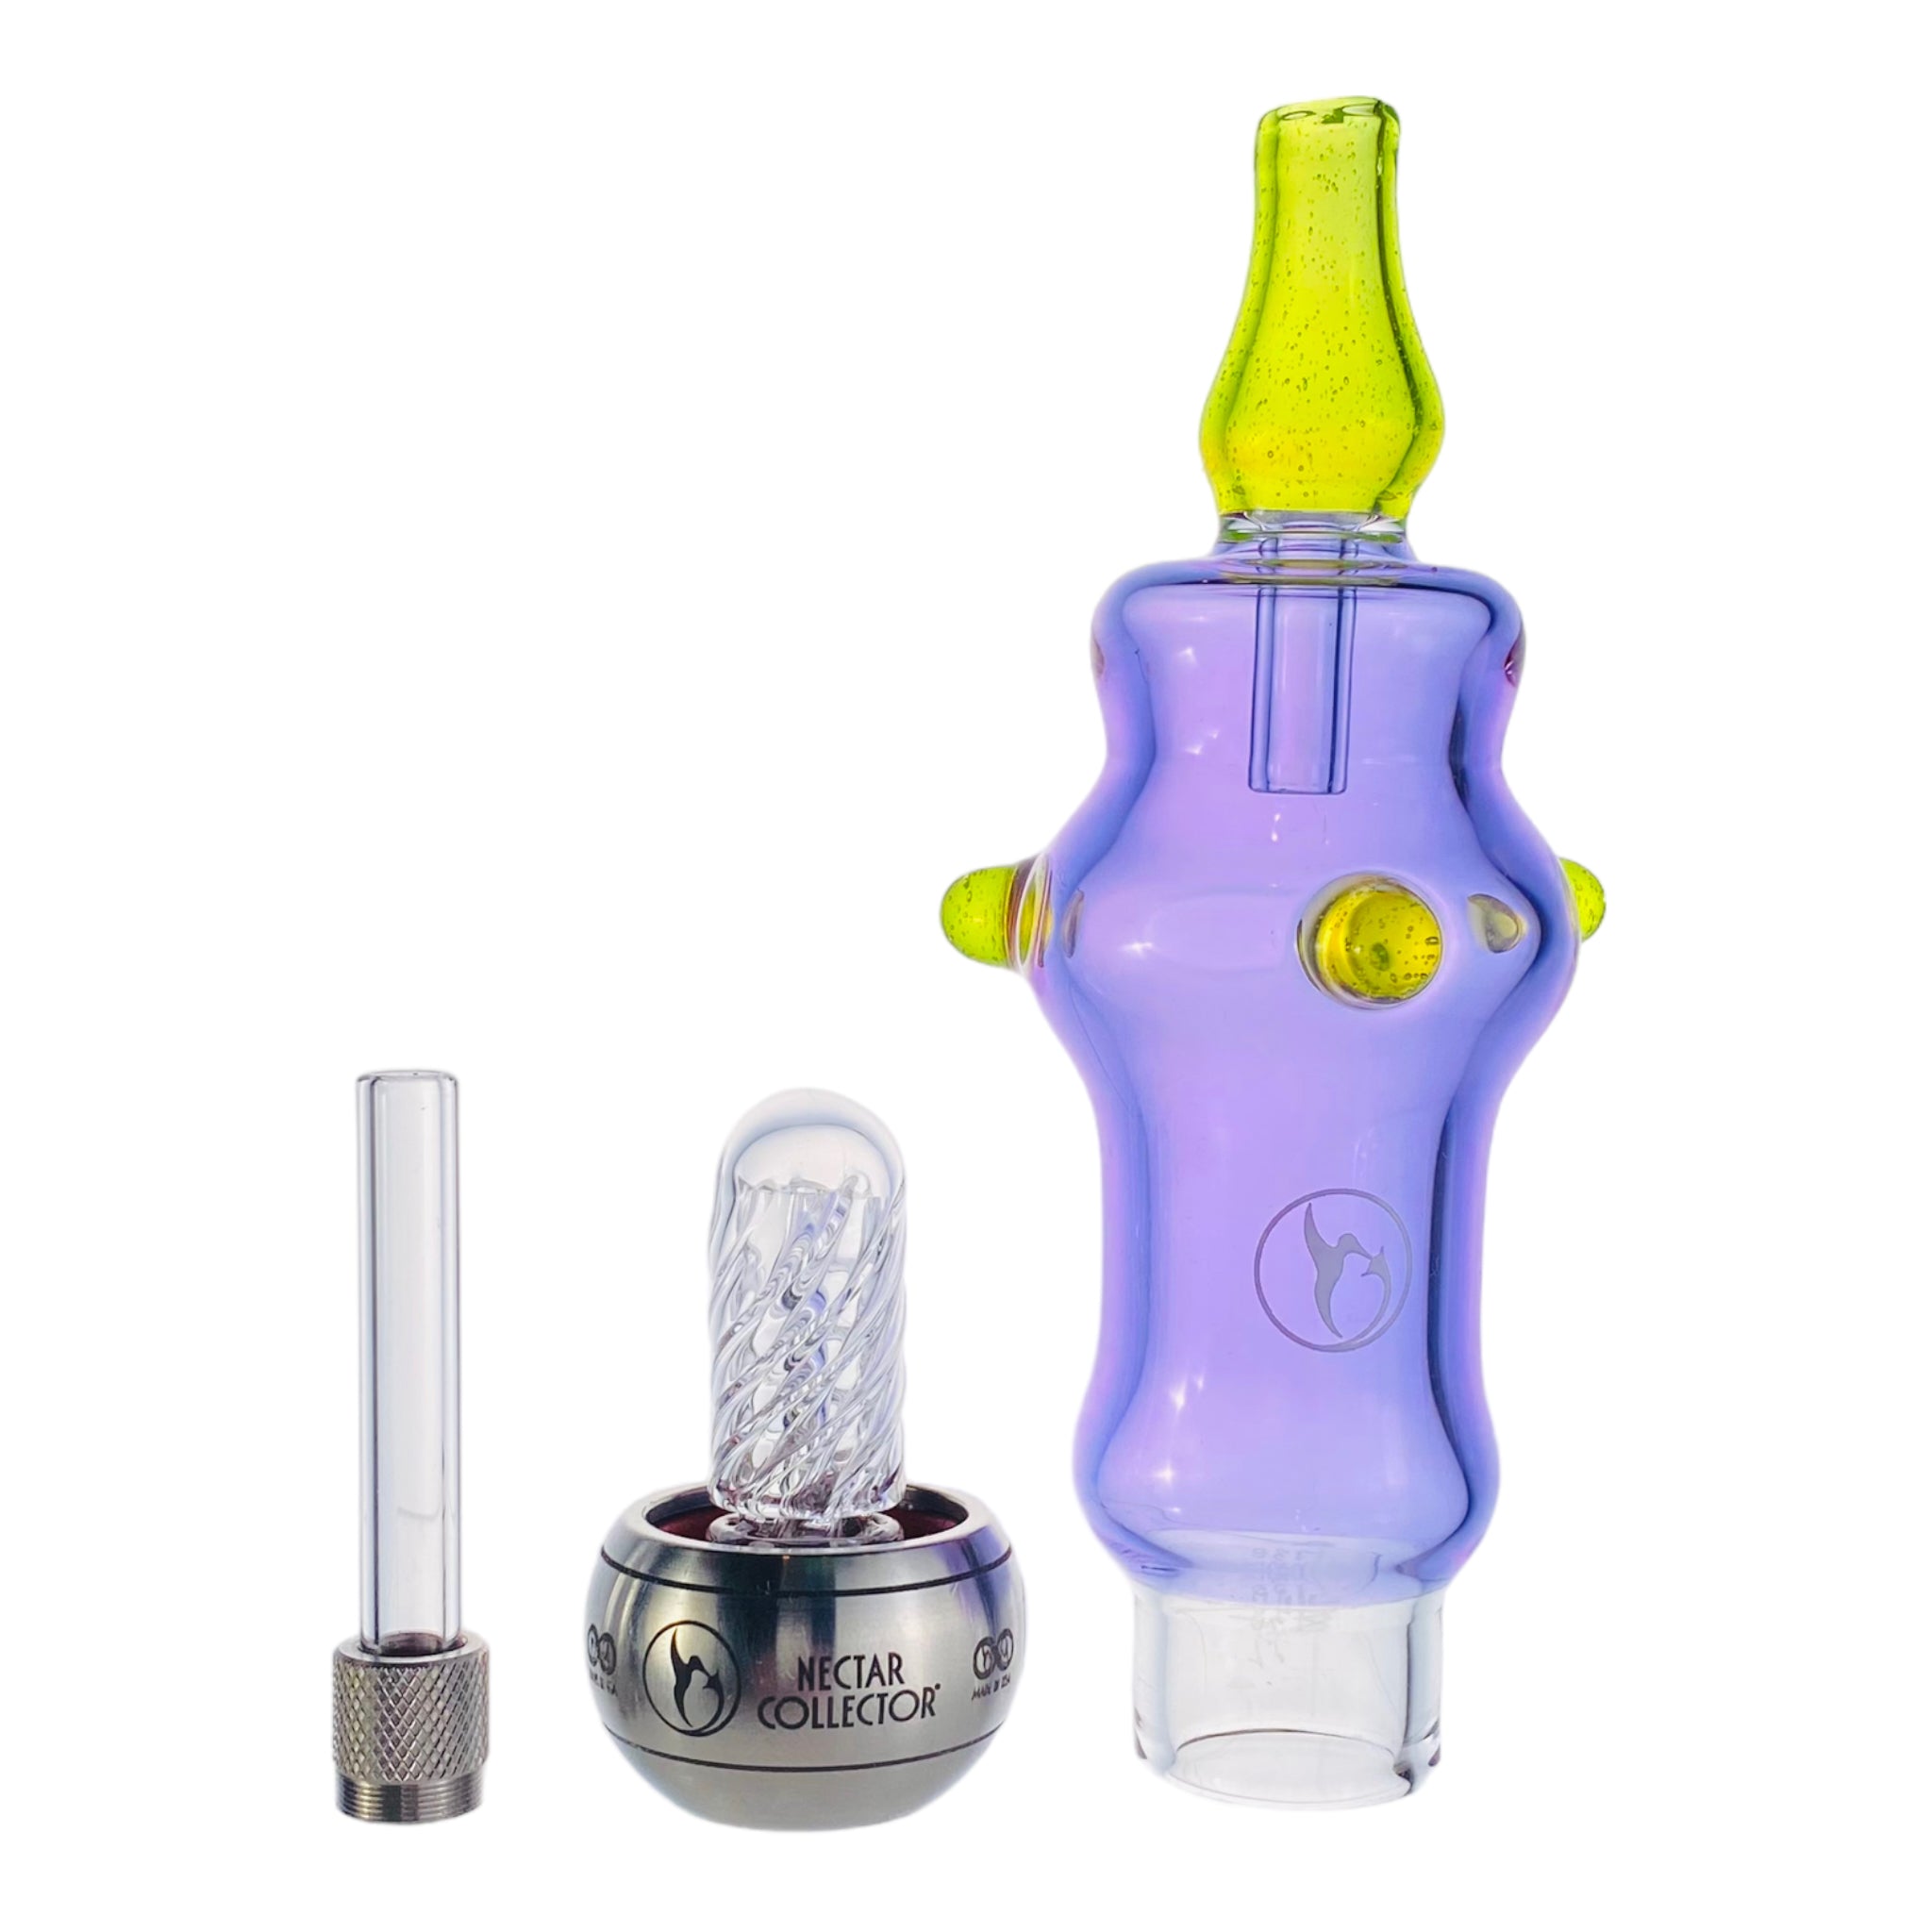 Nectar Collector - Purple And Green Micro Nectar Collector Delux Kit parts 